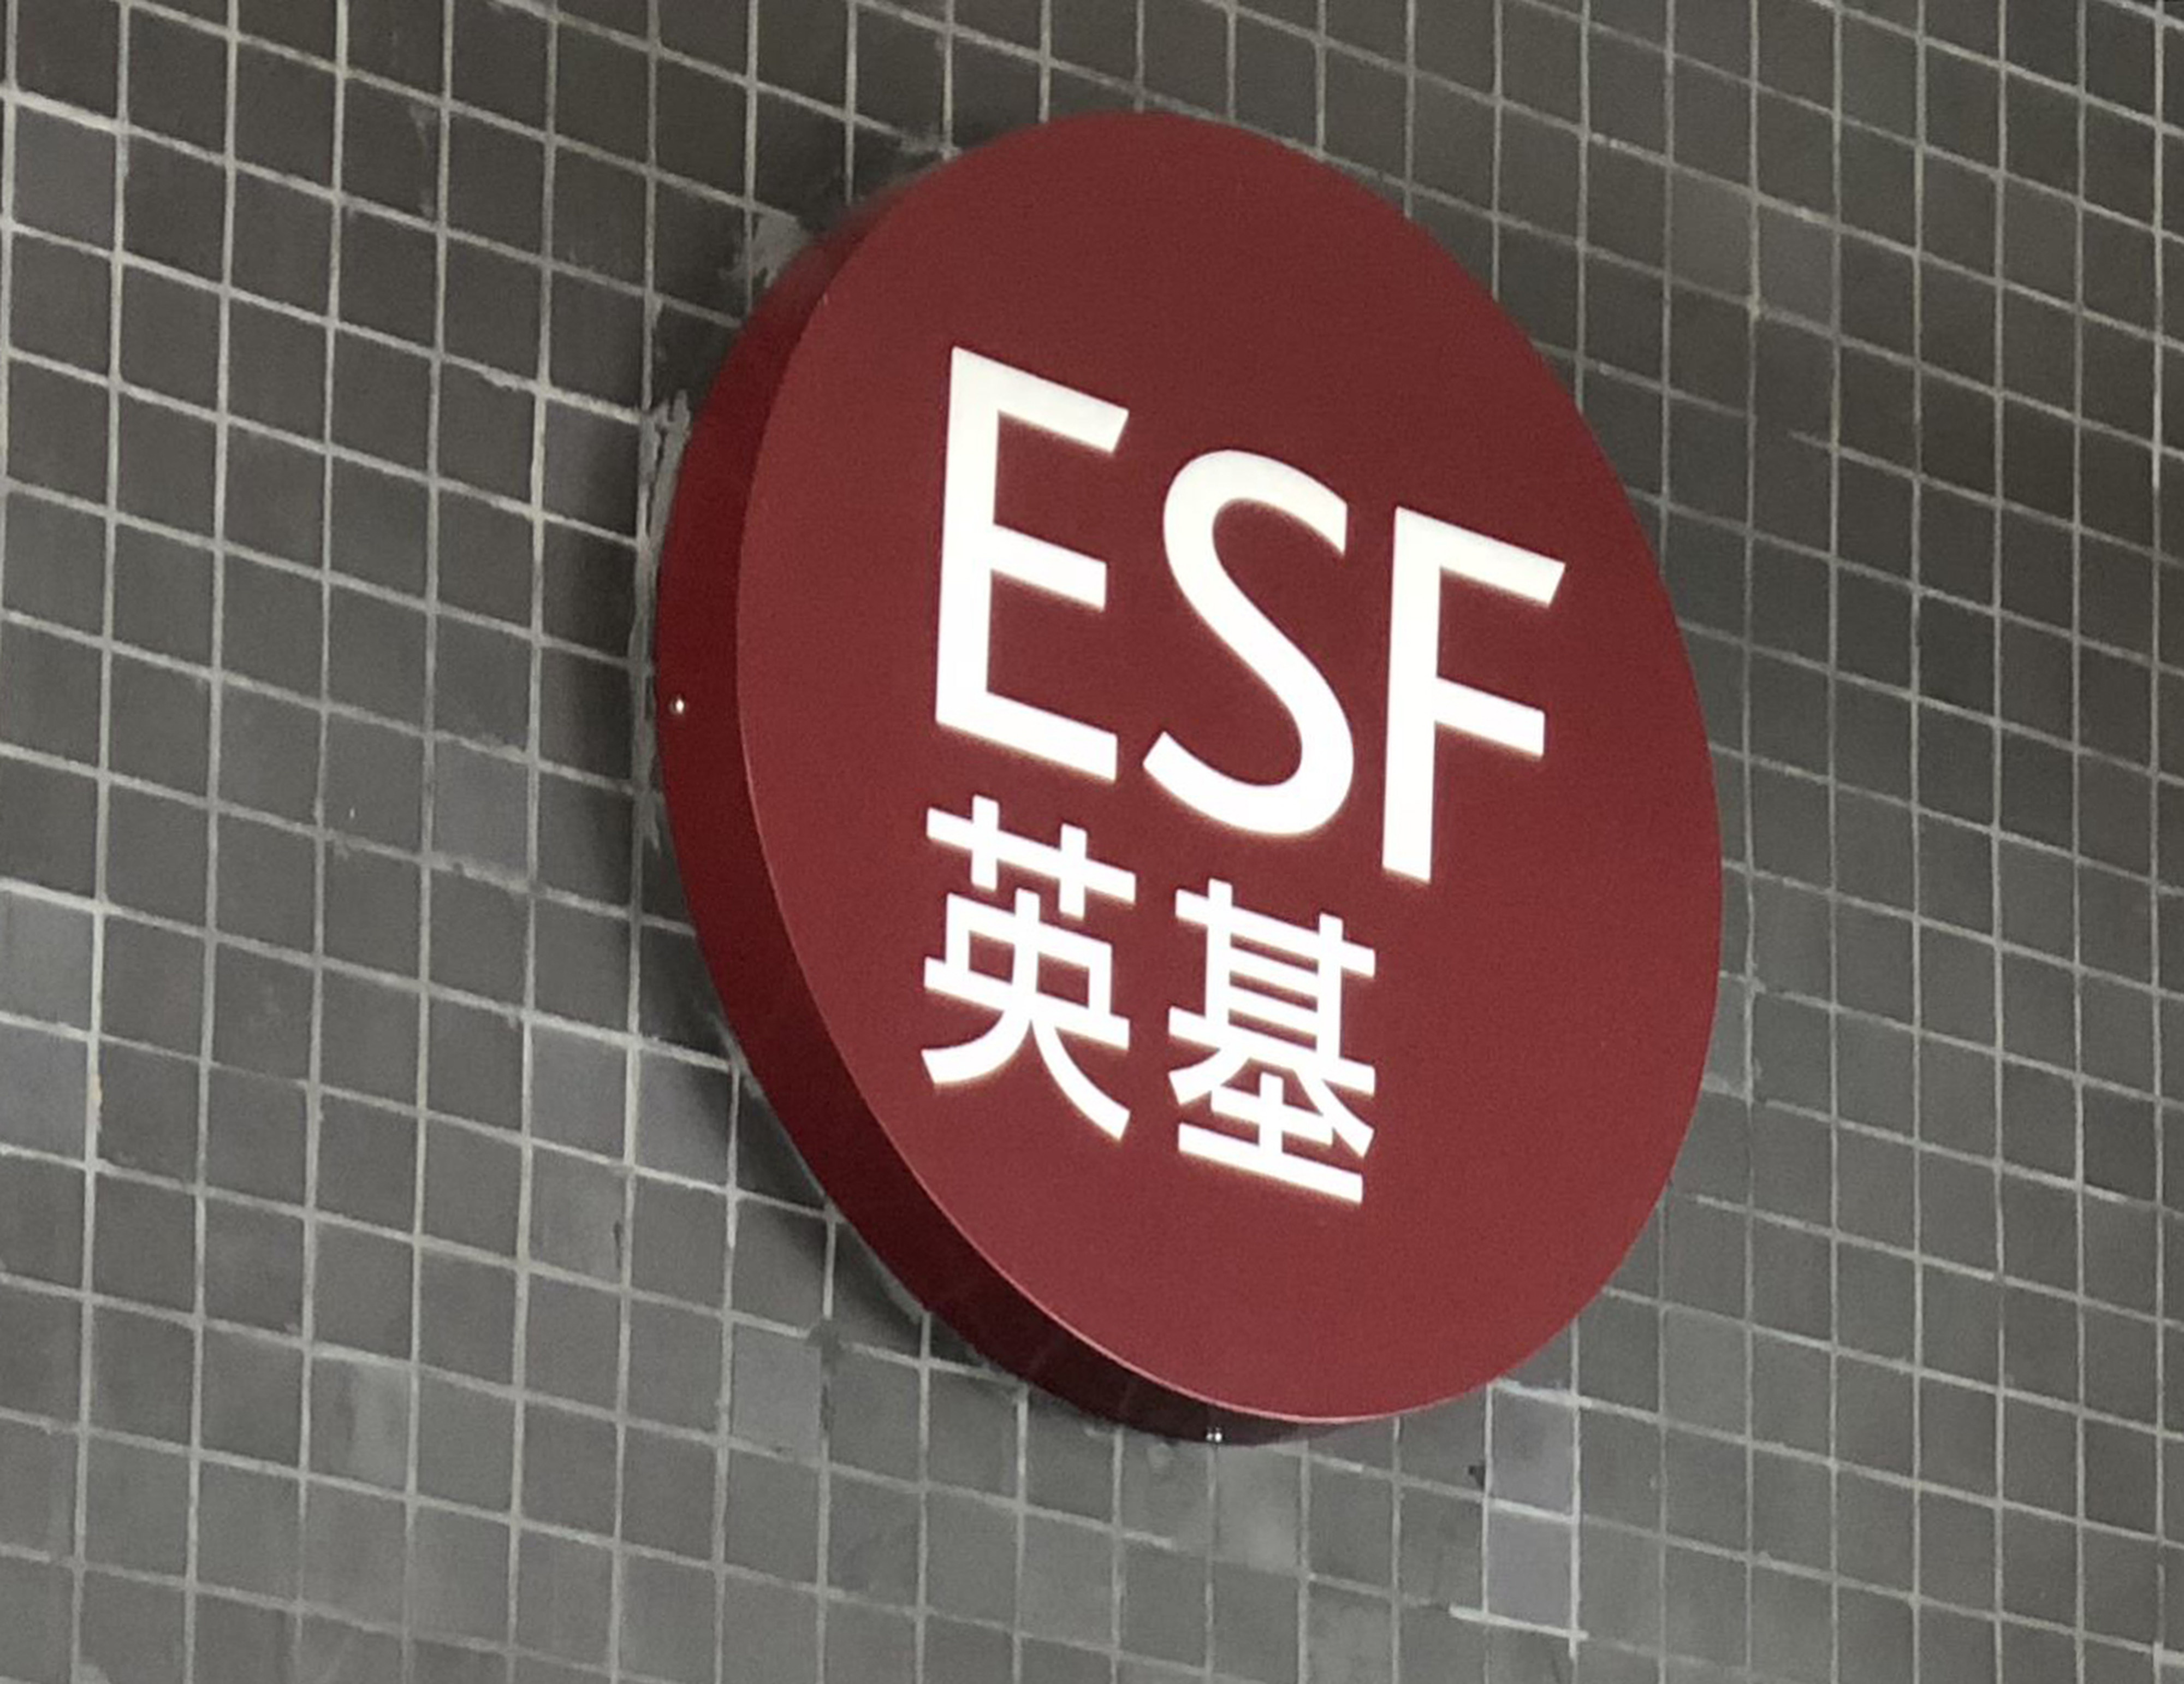 The Education Bureau has said it will remind the ESF and other international schools they must comply with requirements on enrolment levels for non-locals students. Photo: May Tse